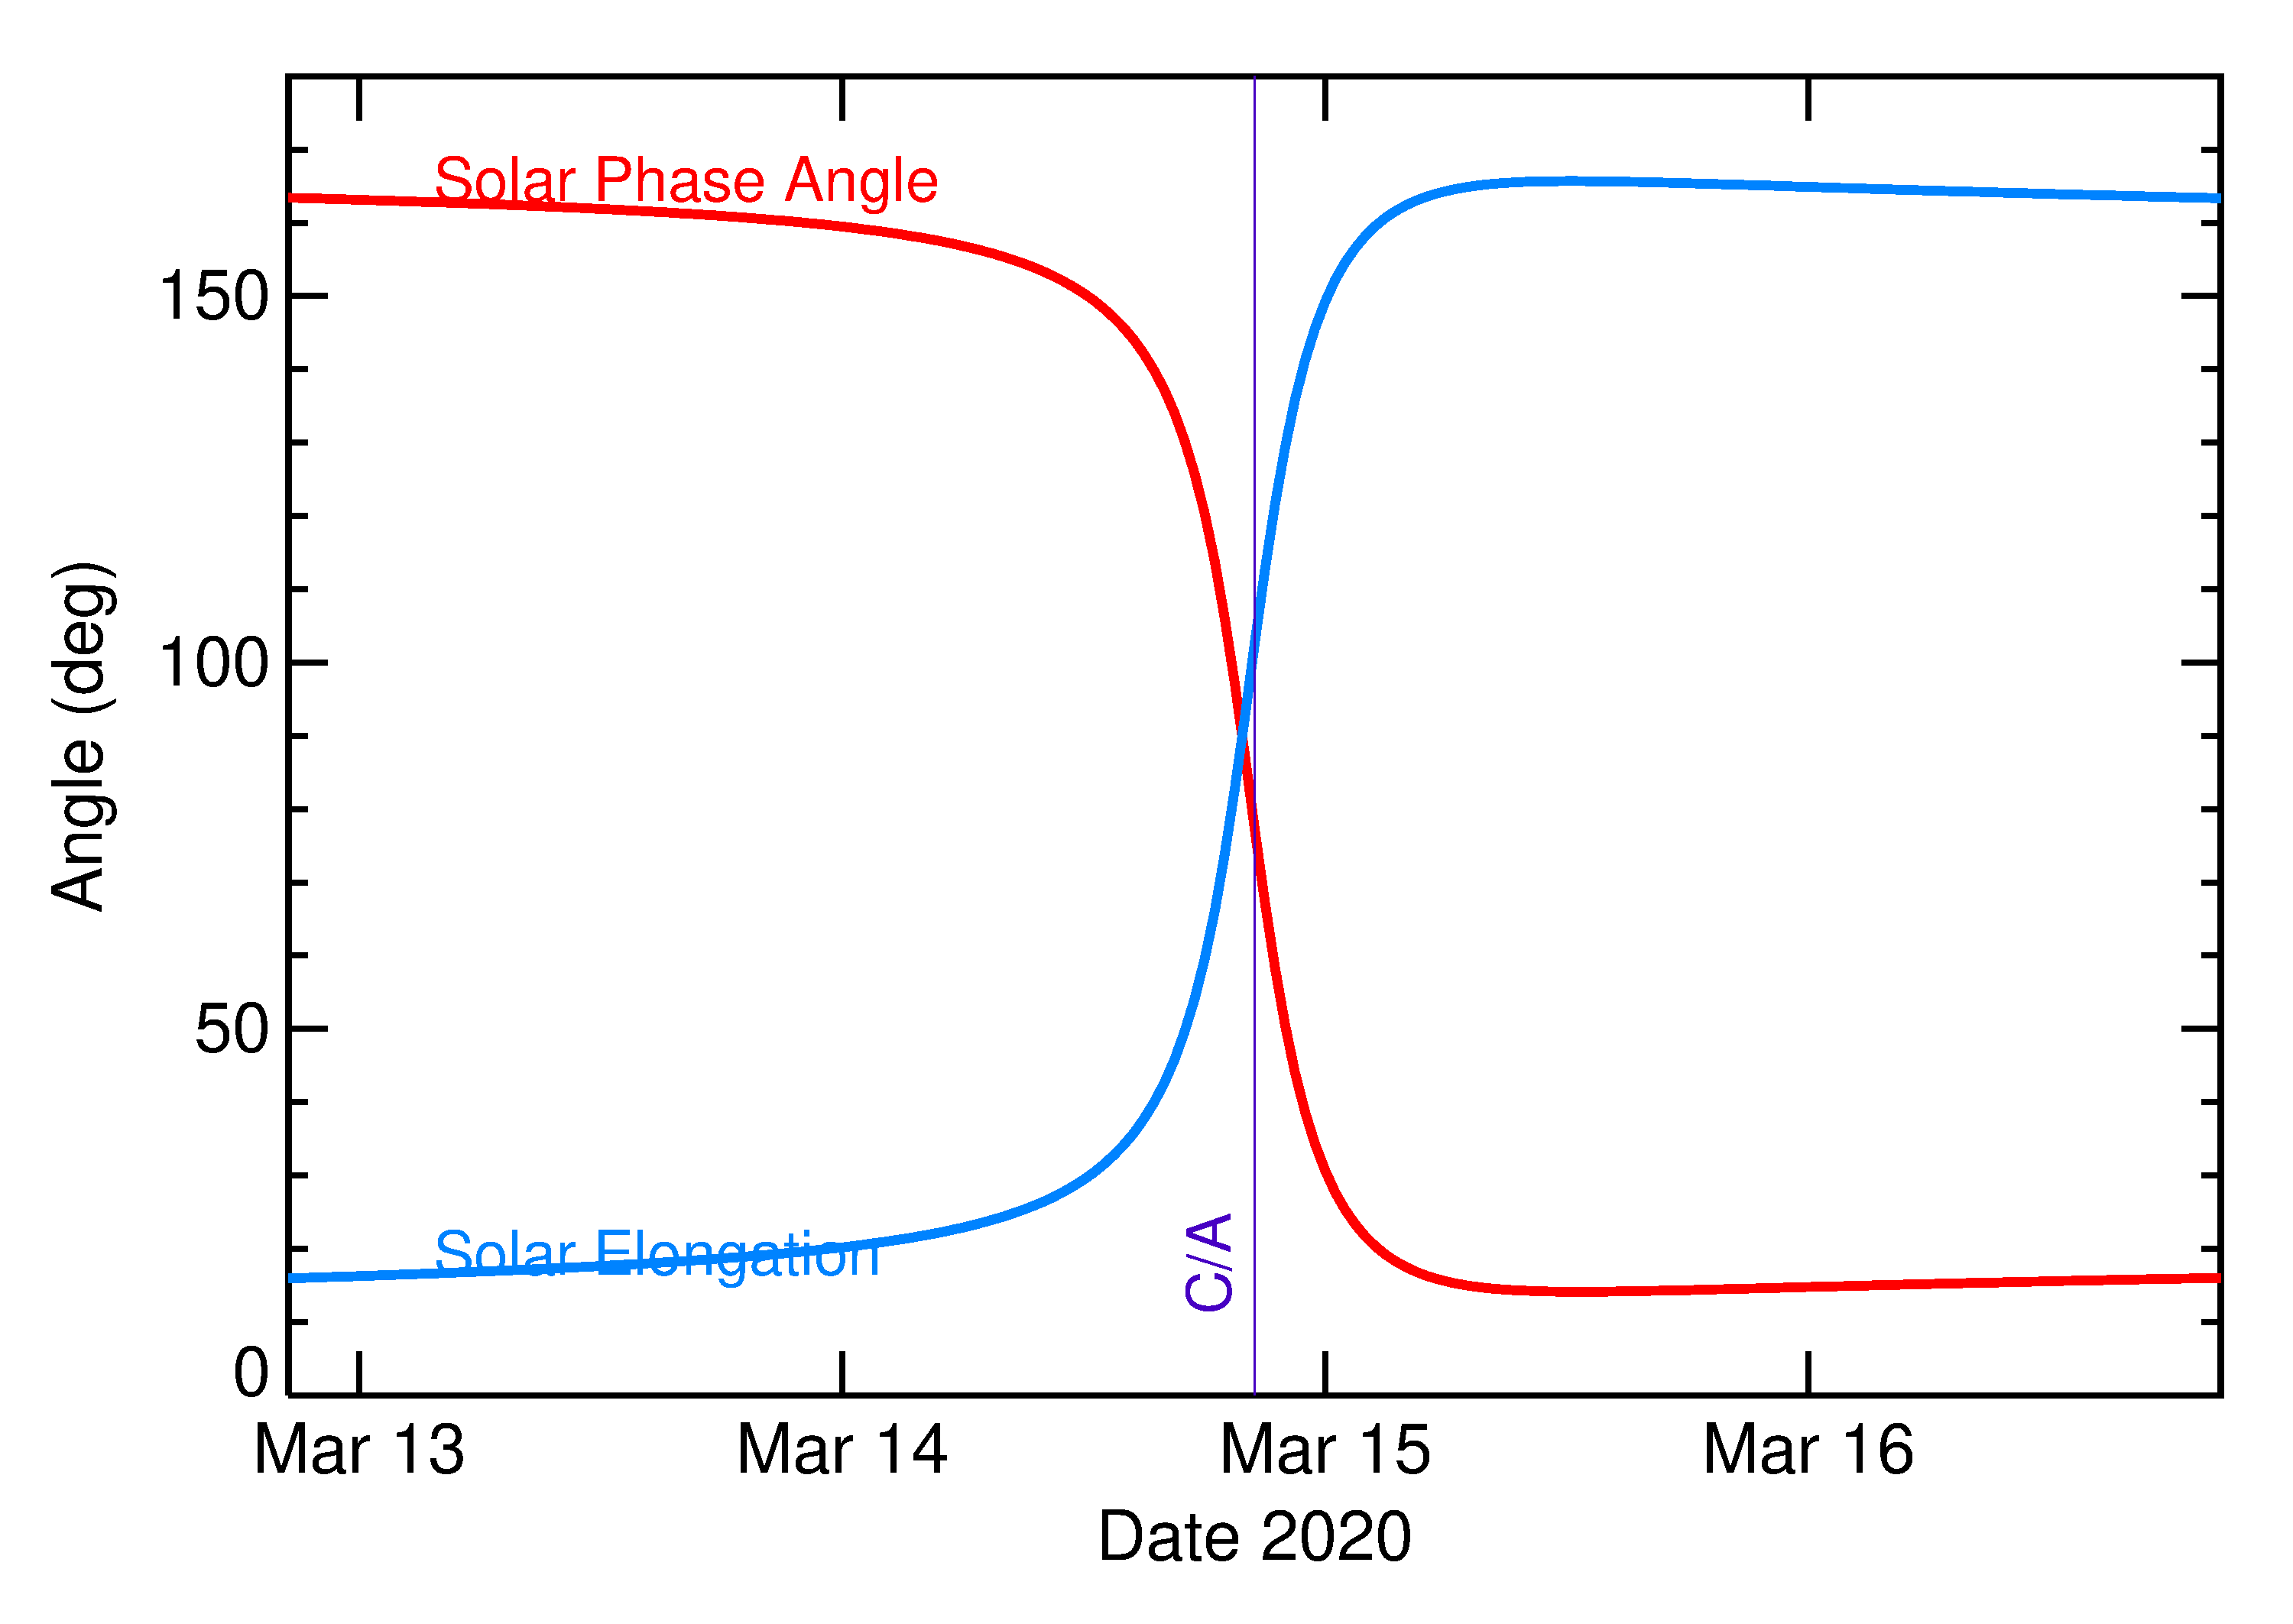 Solar Elongation and Solar Phase Angle of 2020 FD2 in the days around closest approach